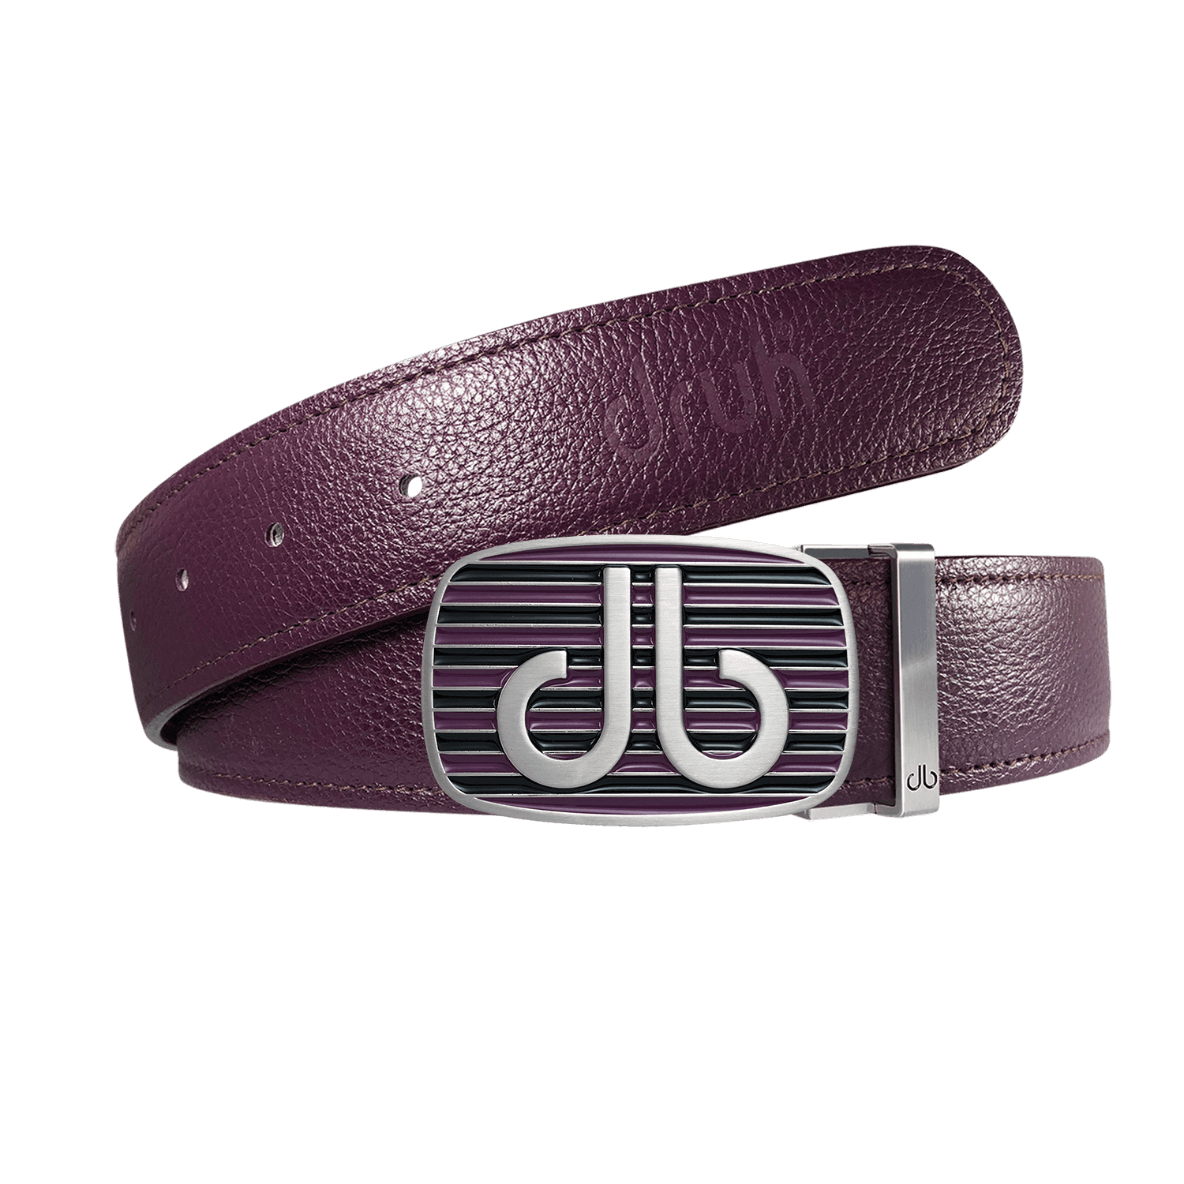 Purple Full grain leather strap with Stripped purple and black buckle